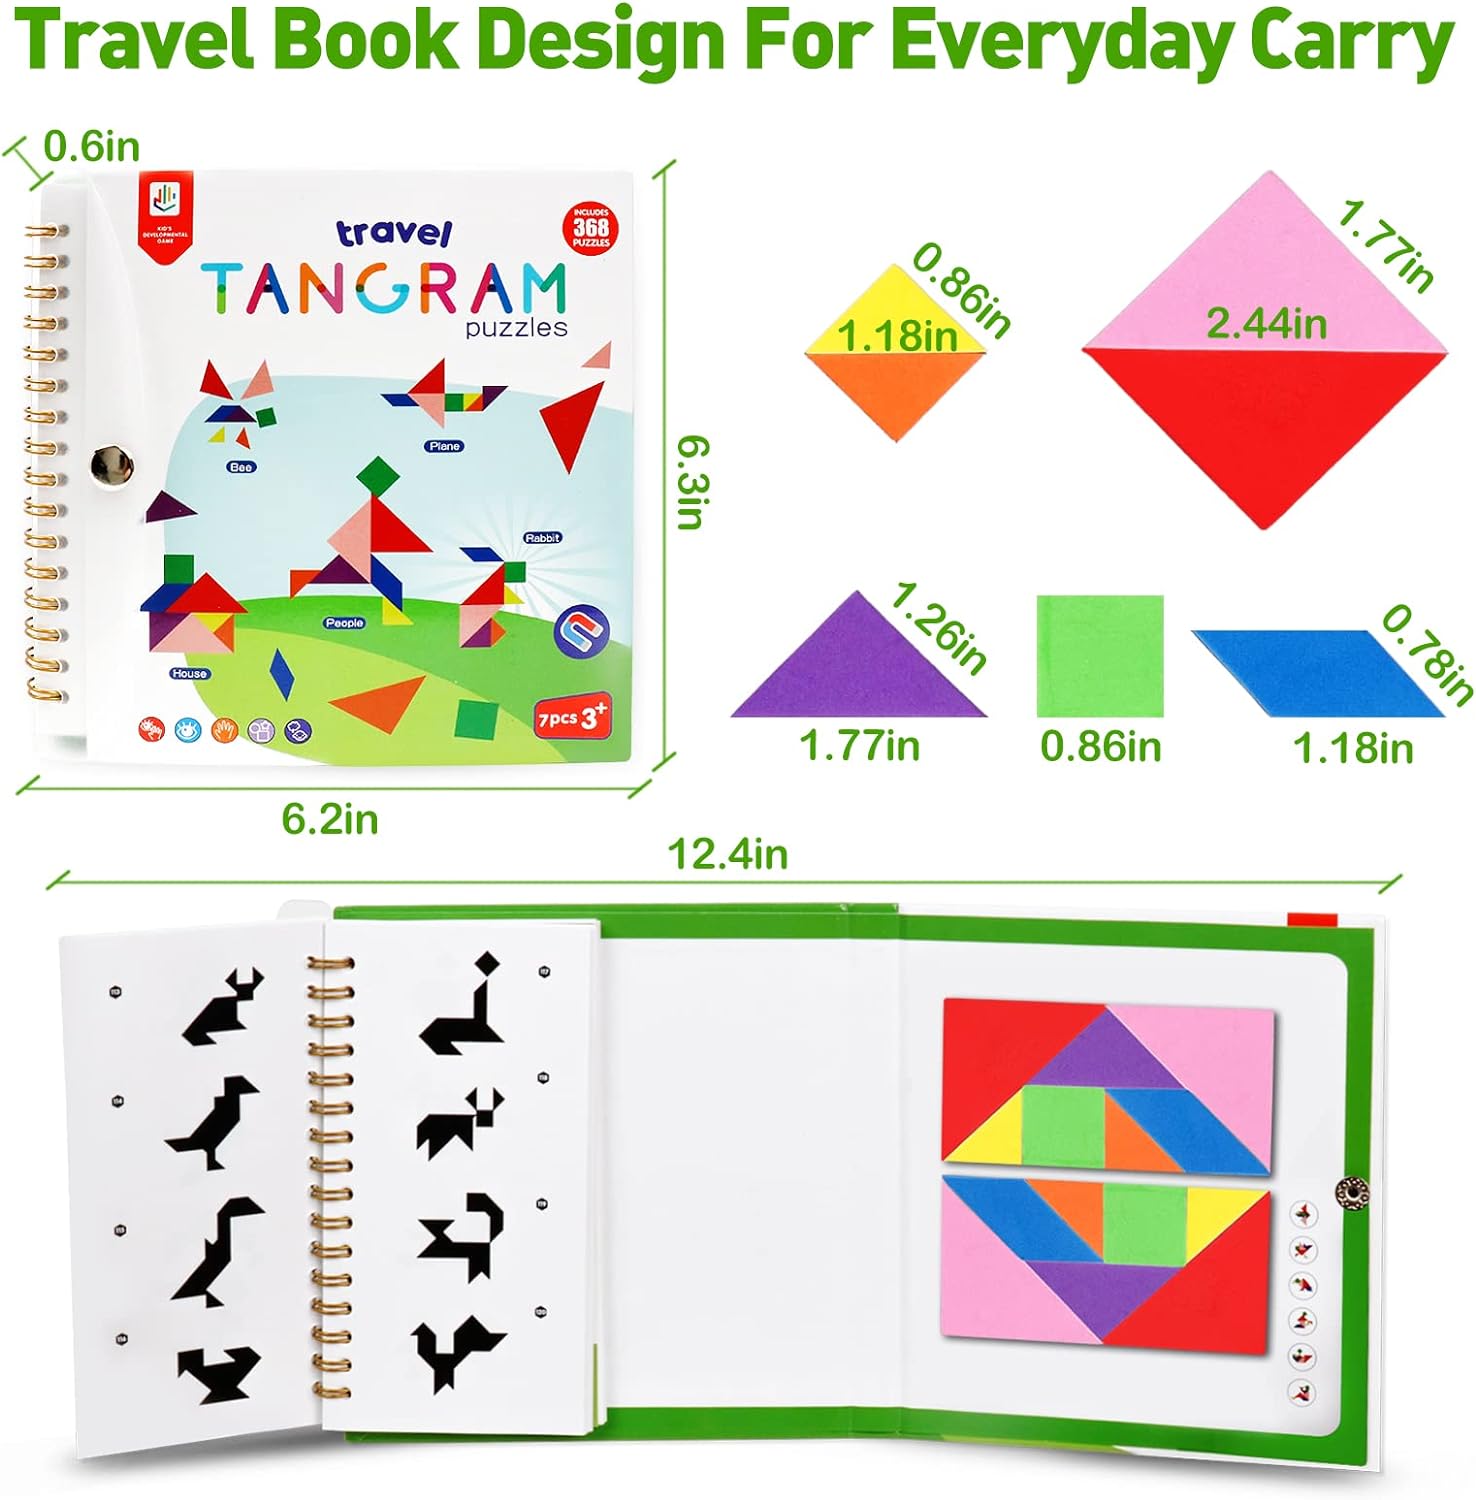 USATDD Travel Tangram Puzzle With 2 Set, Magnetic Pattern Blocks Road Trip Games Educational Jigsaw Challenge Books For Kid Adult Brain Teasers With 368 Solution Montessori Travel Toys For Kids In Car